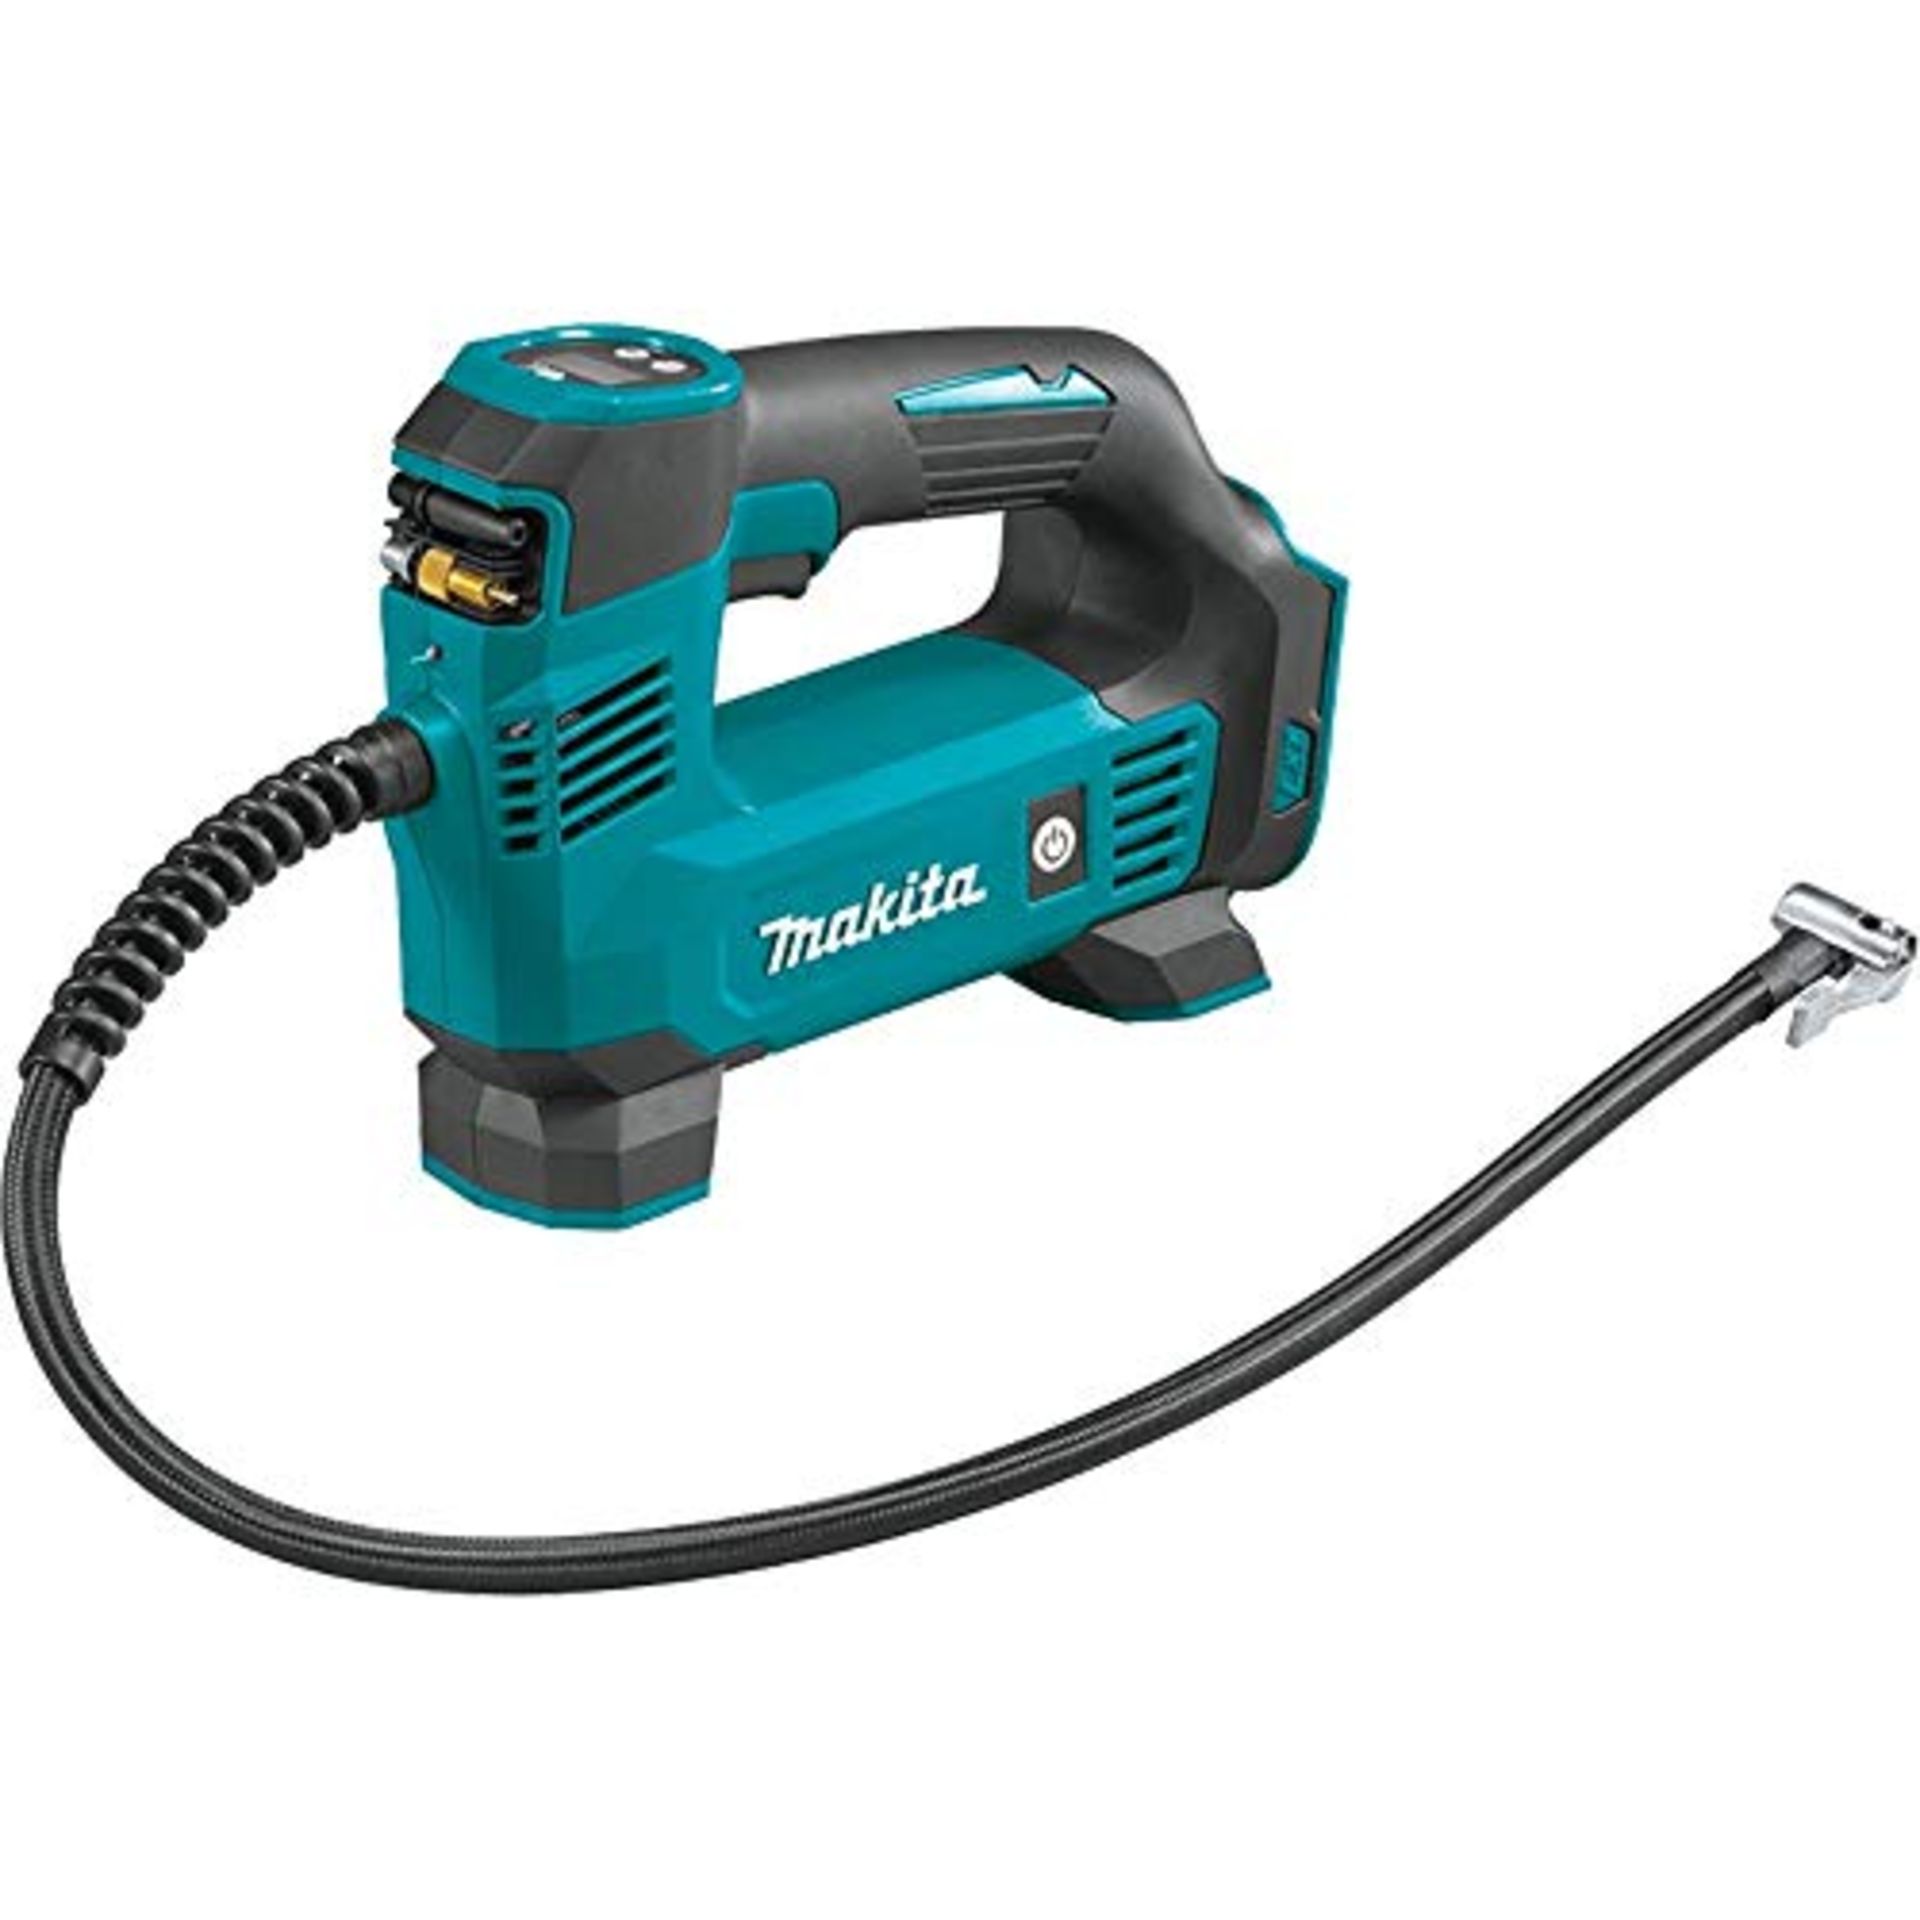 RRP £61.00 Makita DMP180Z 18V Li-ion LXT Inflator - Batteries and Charger Not Included, Blue/Silv